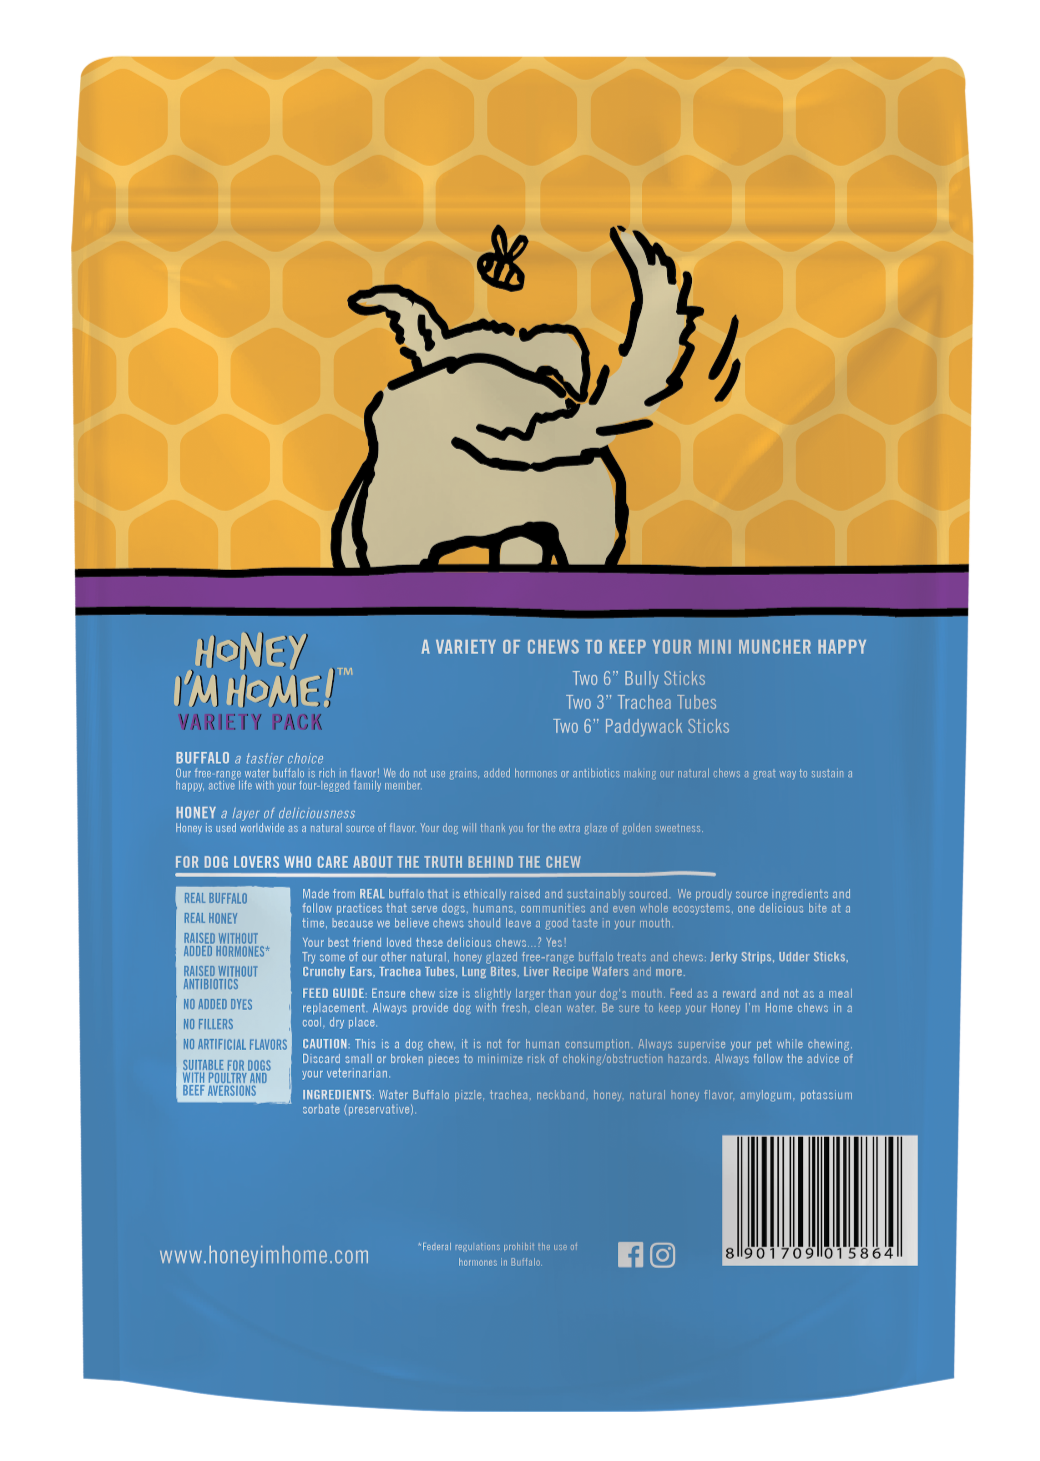 back of package, yellow top, blue bottom, shows ingredients and benefits